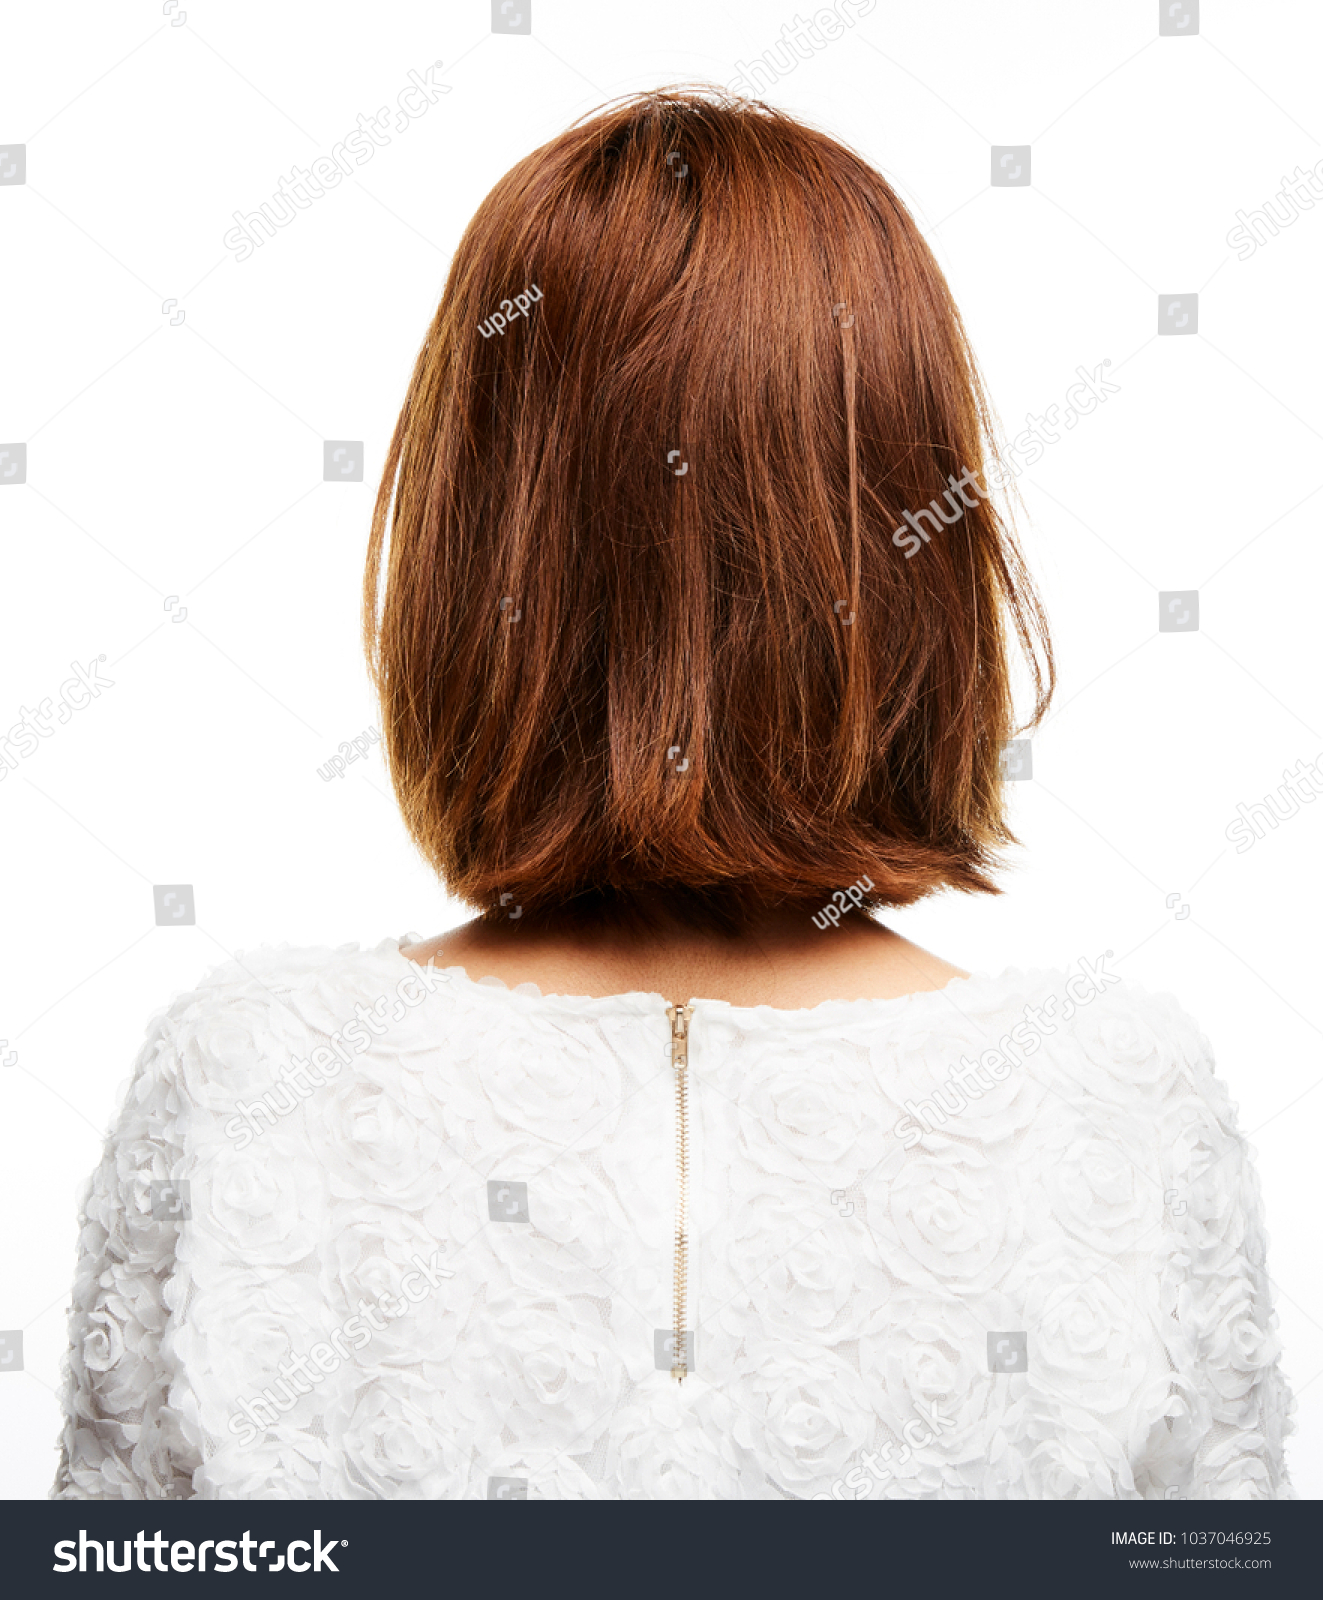 Red Short Hair Model Back View Stock Photo Edit Now 1037046925